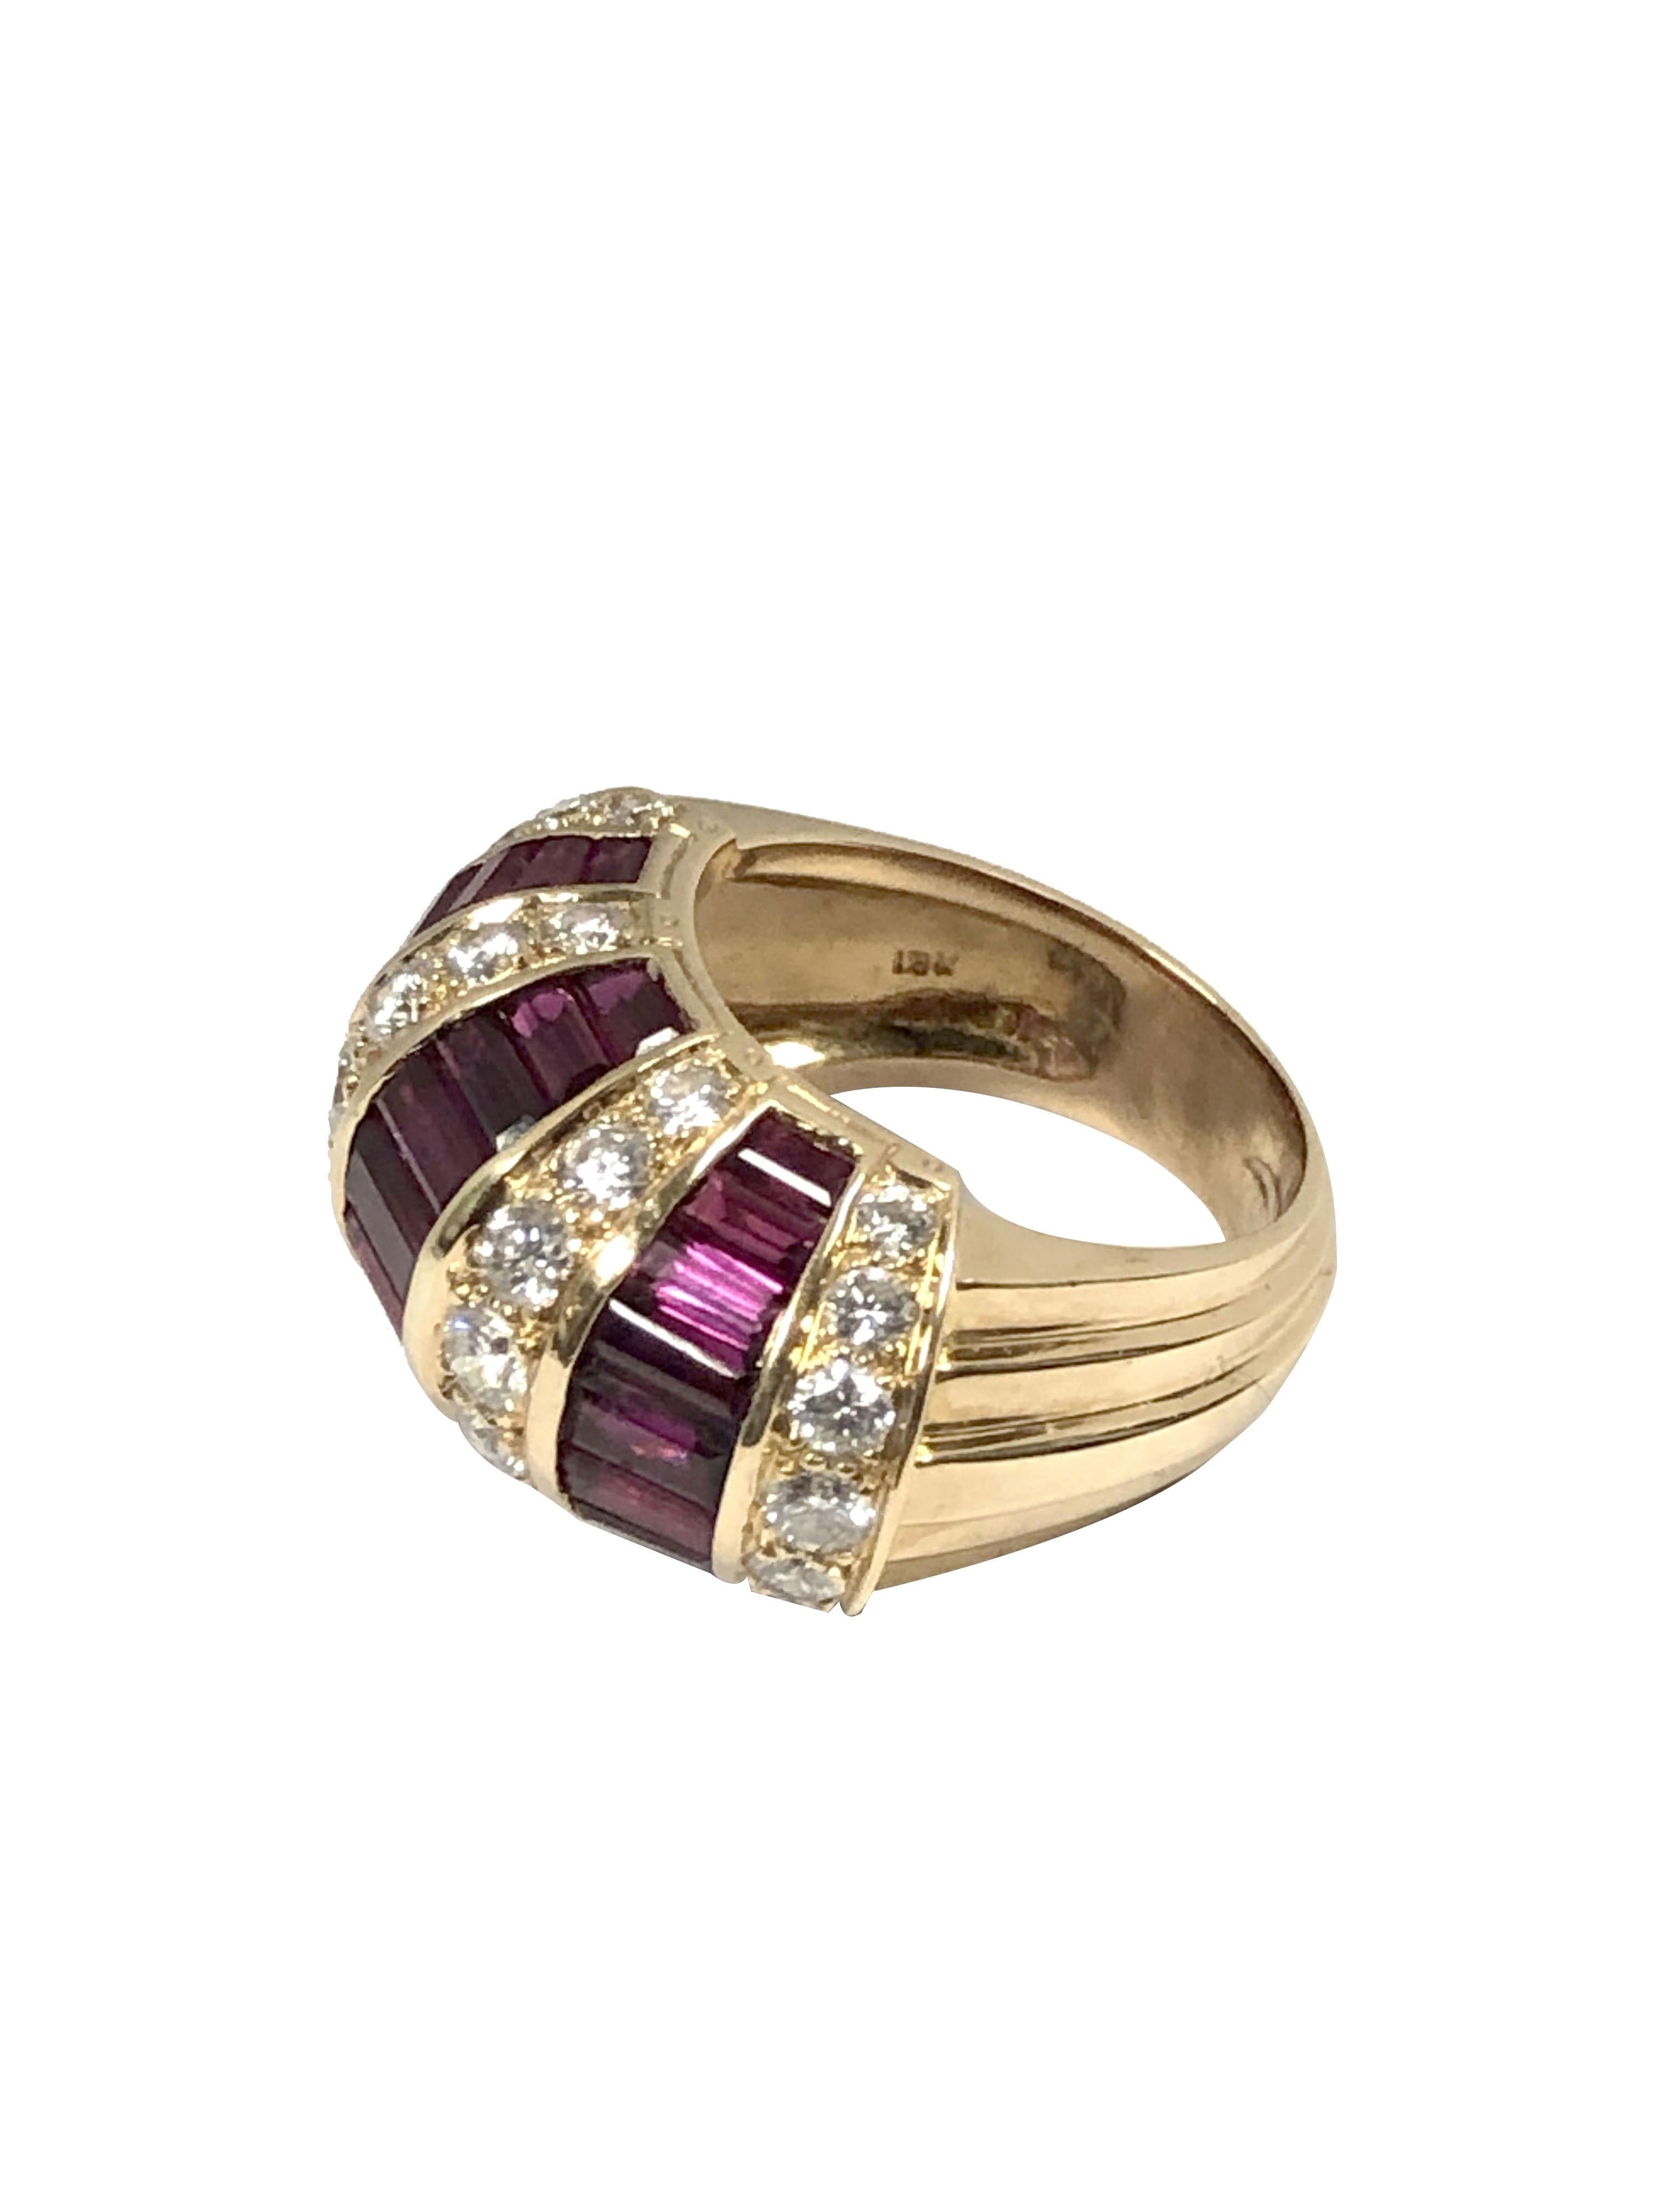 Oscar Heyman Large Yellow Gold Ruby and Diamond Cocktail Ring 2